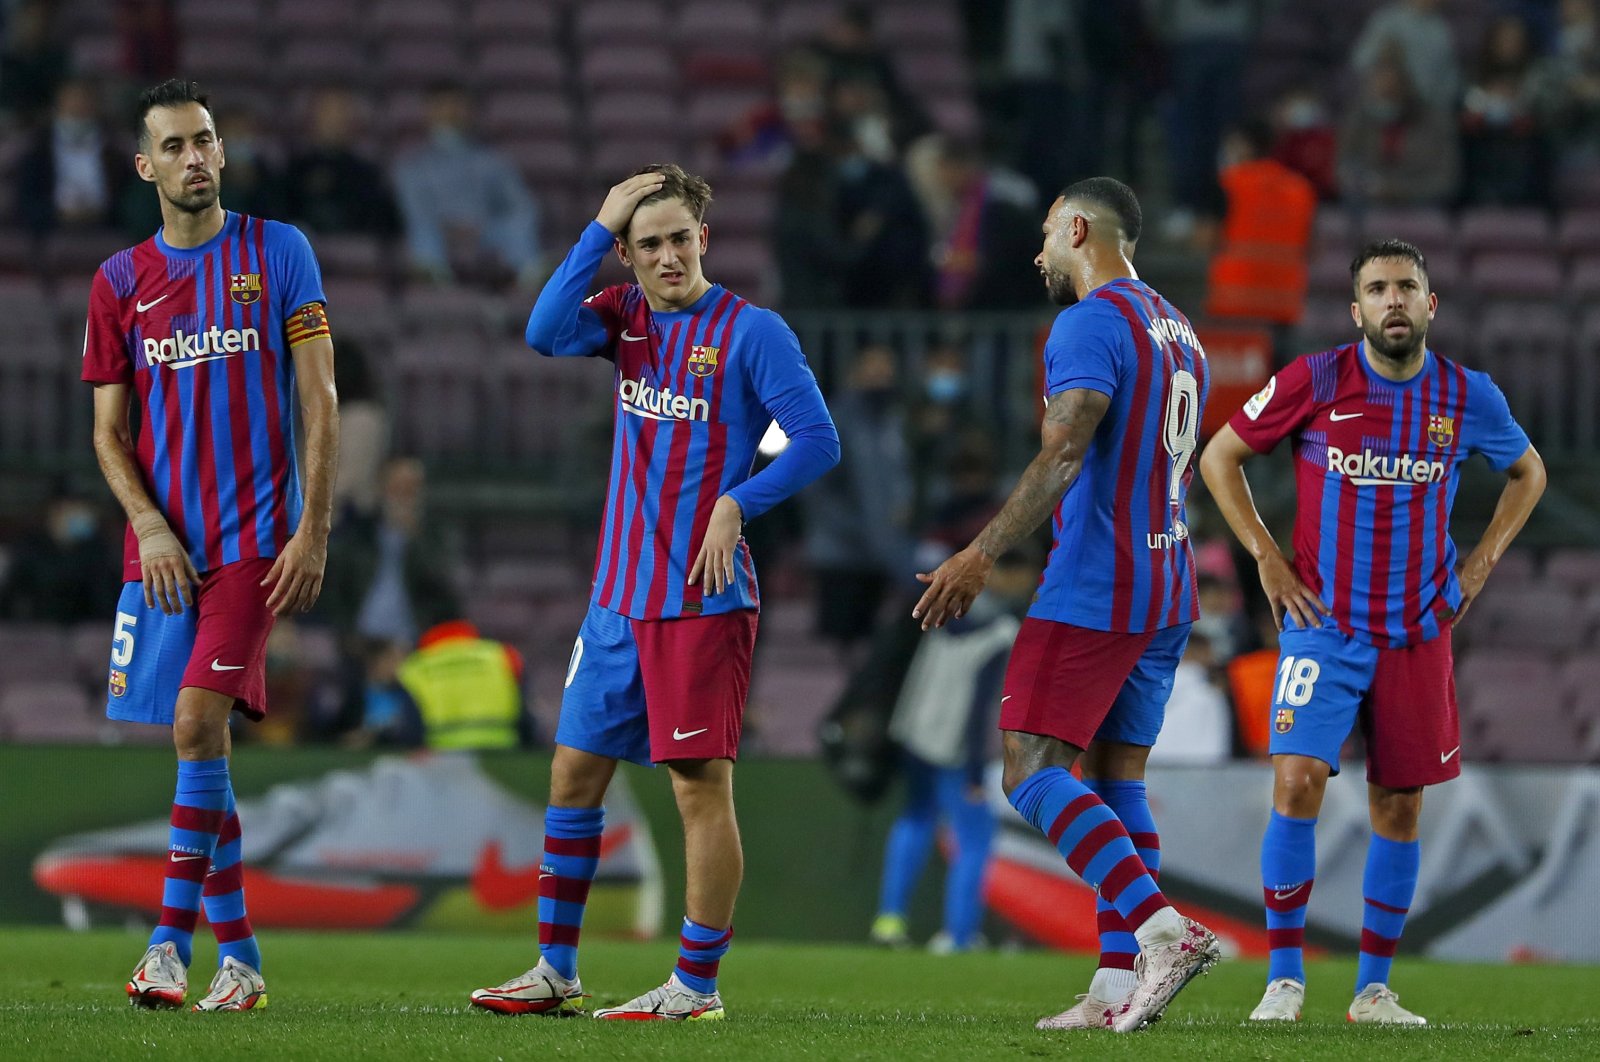 Barcelona players react after a La Liga match against Alaves at the Camp Nou in Barcelona, Spain, Oct. 30, 2021. (AP Photo)